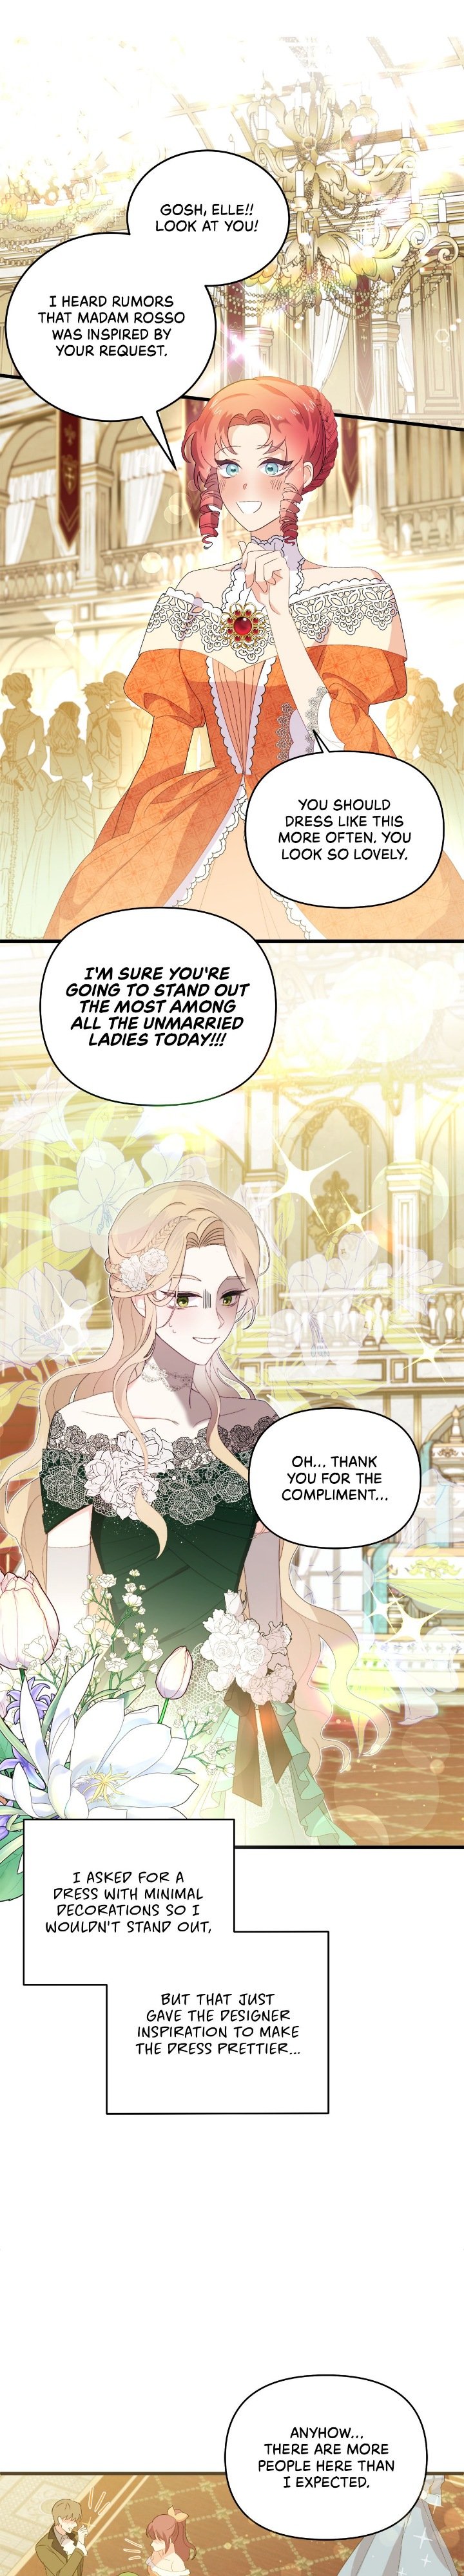 A Tipsy Marriage Proposal for the Emperor chapter 5